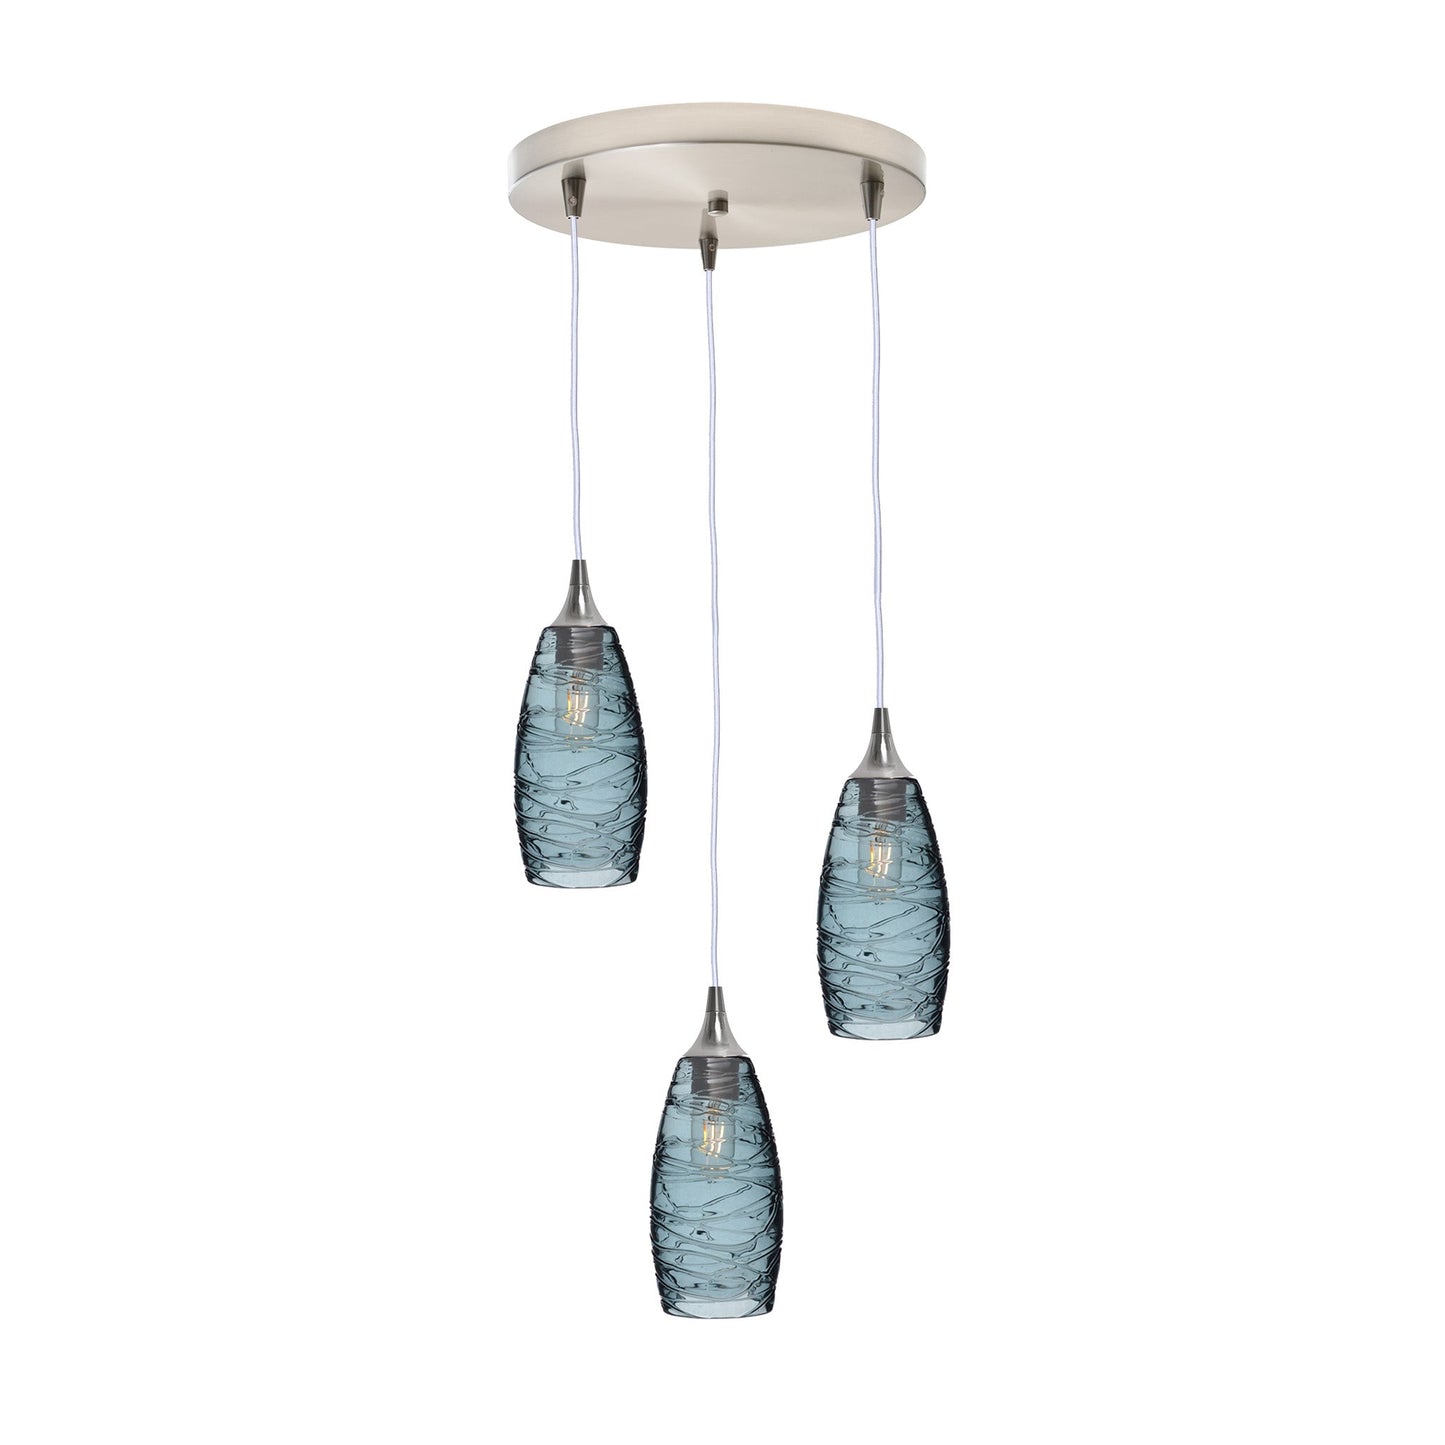 147 Spun: 3 Pendant Cascade Chandelier-Glass-Bicycle Glass Co - Hotshop-Slate Gray-Brushed Nickel-Bicycle Glass Co